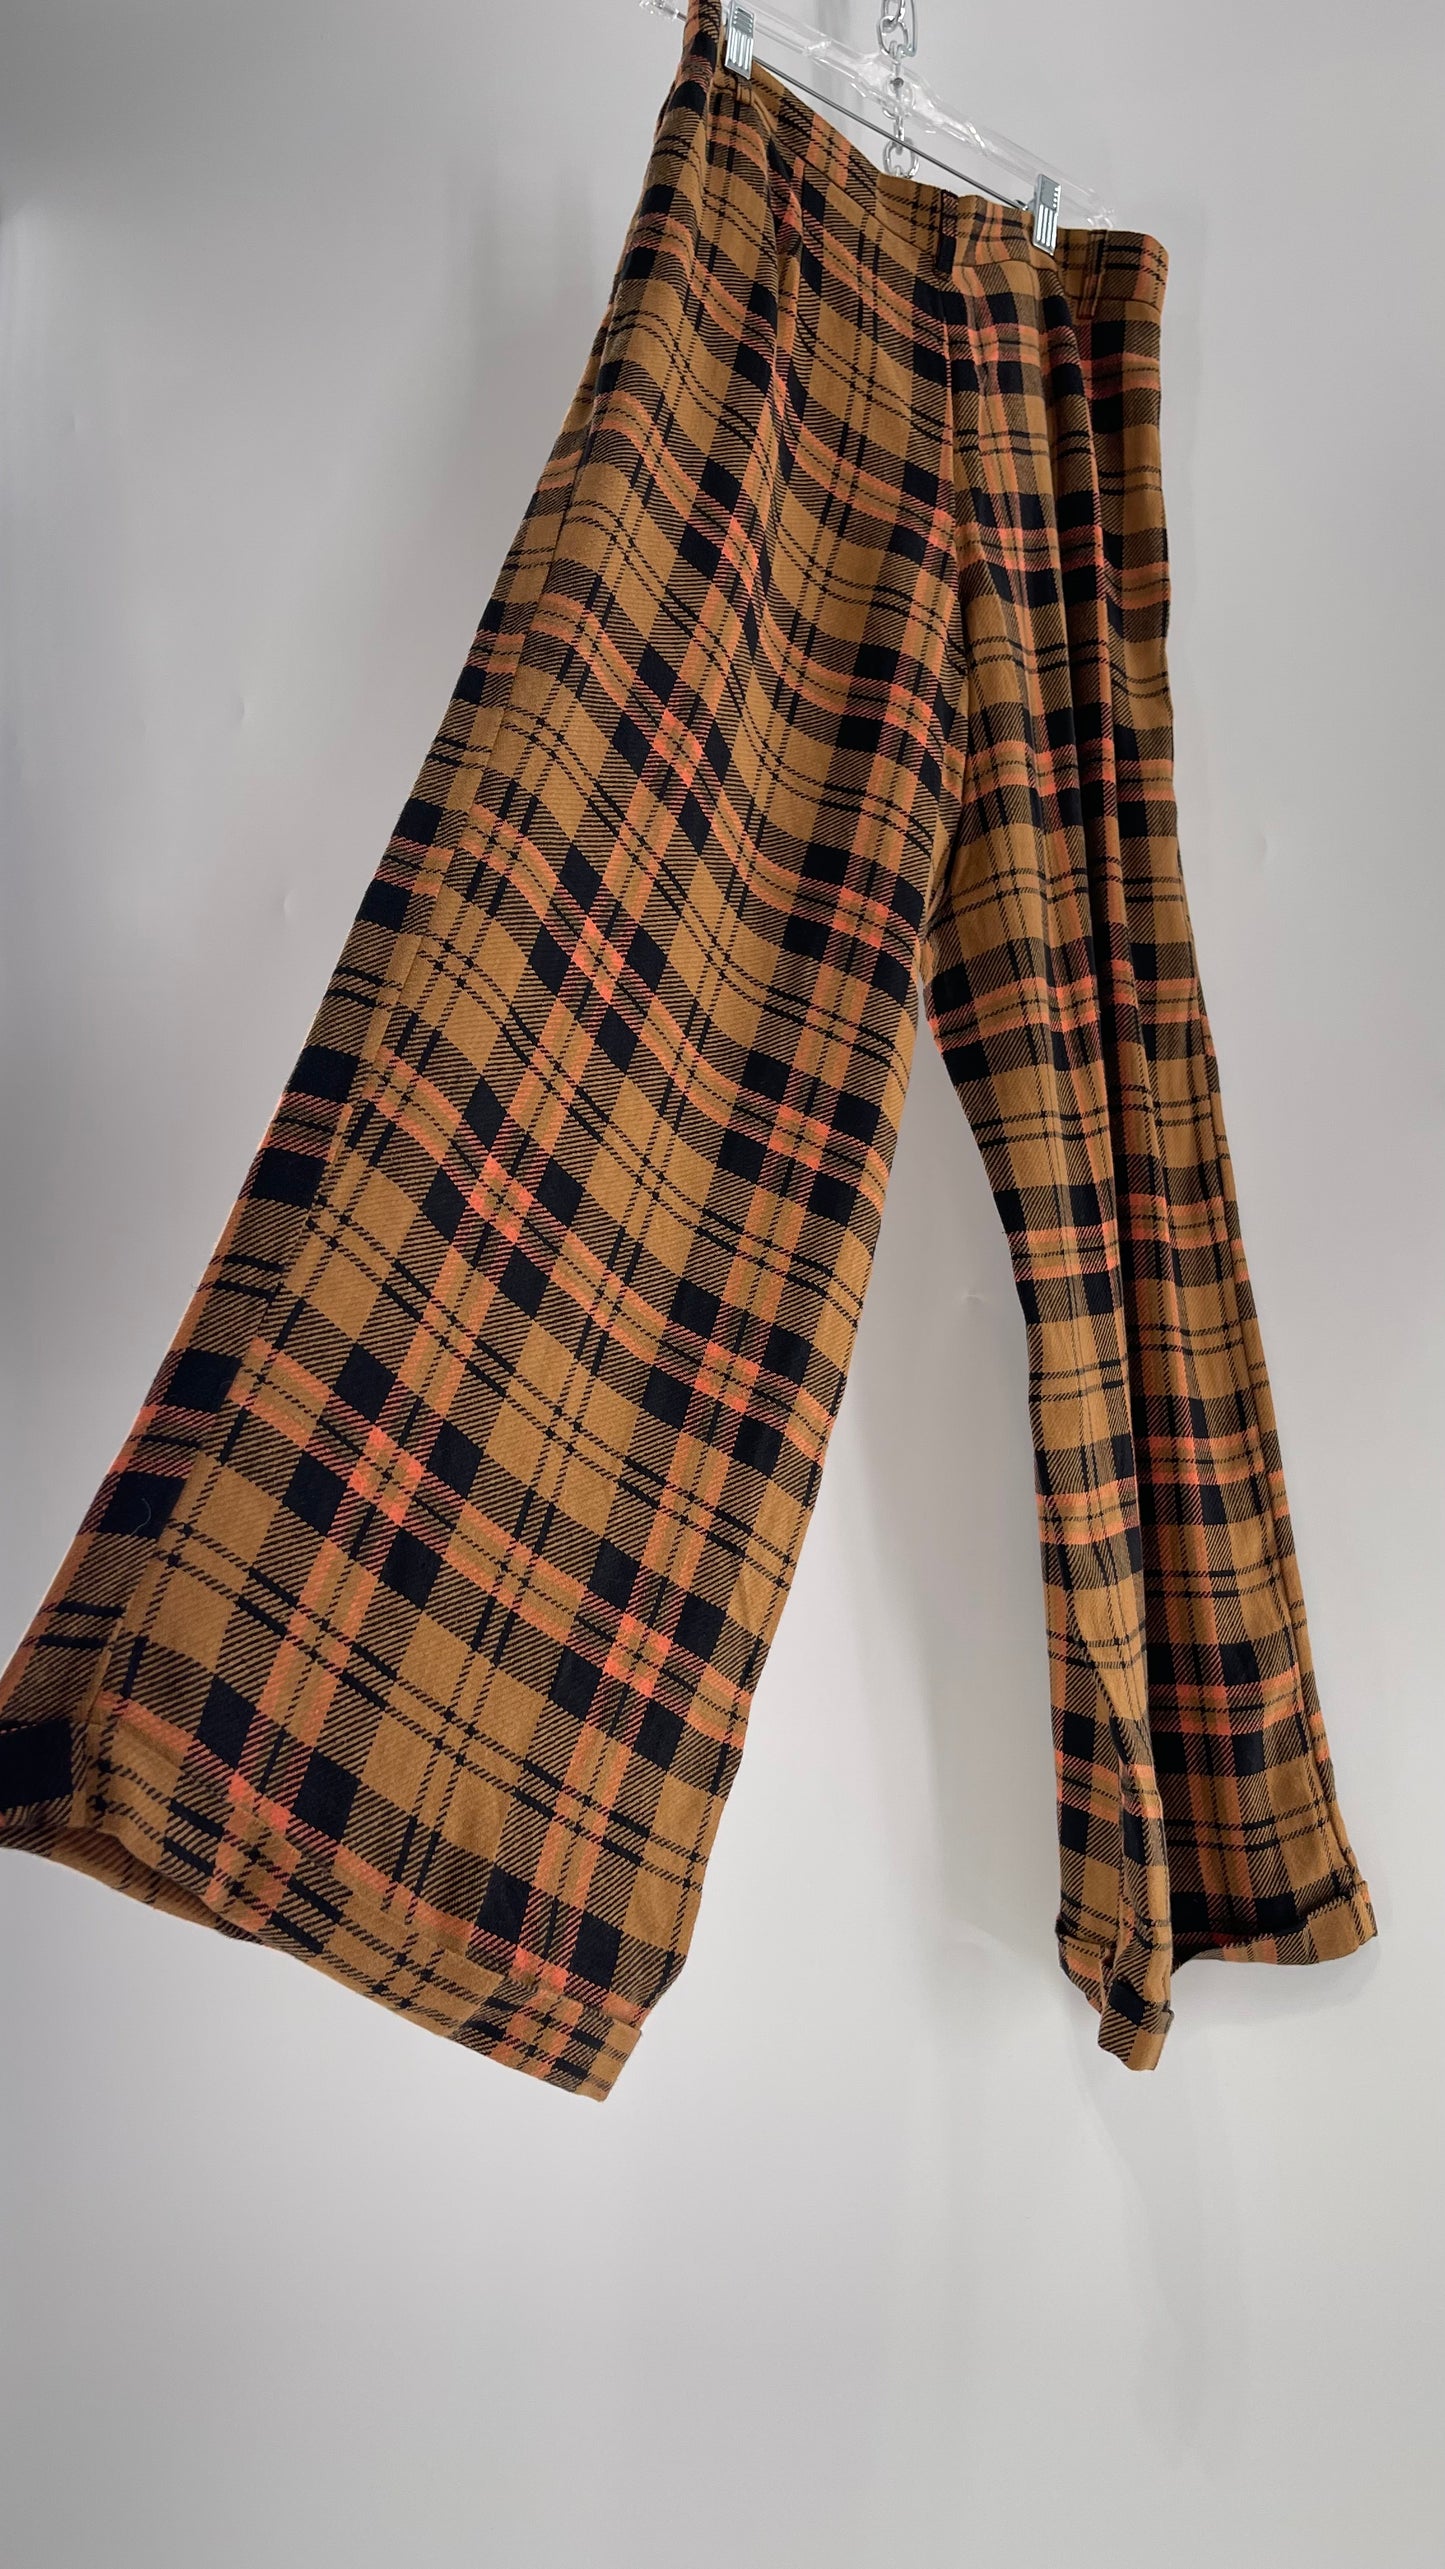 Free People Mustard,Salmon, Black Plaid High Waisted Wide Leg Trouser with Pleating (4)